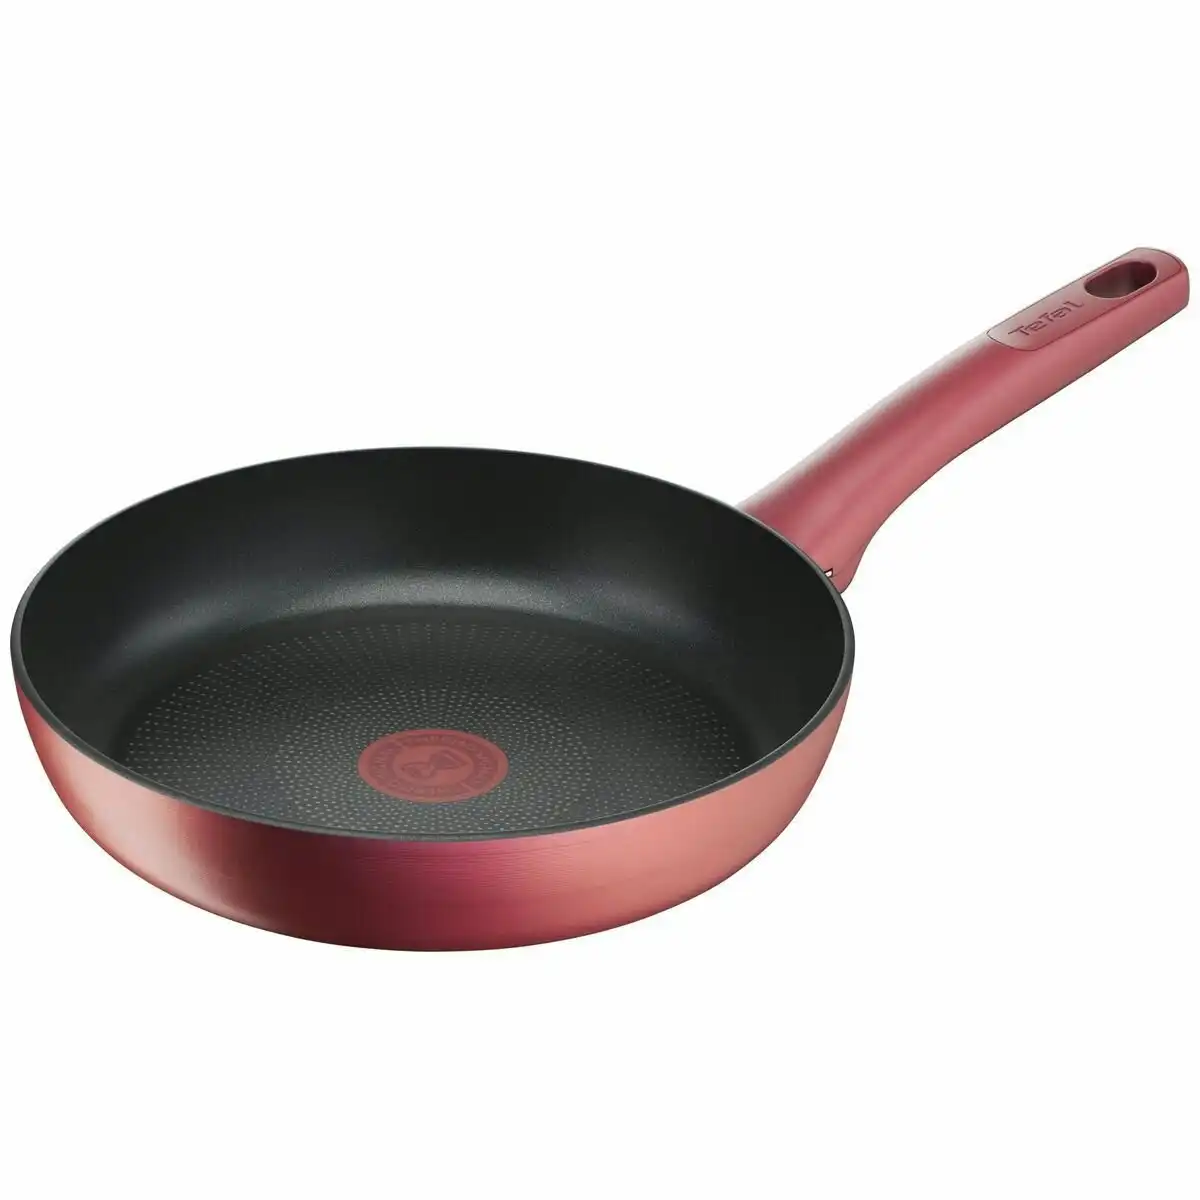 Tefal 24cm Perfect Cook Induction Non-Stick Frypan